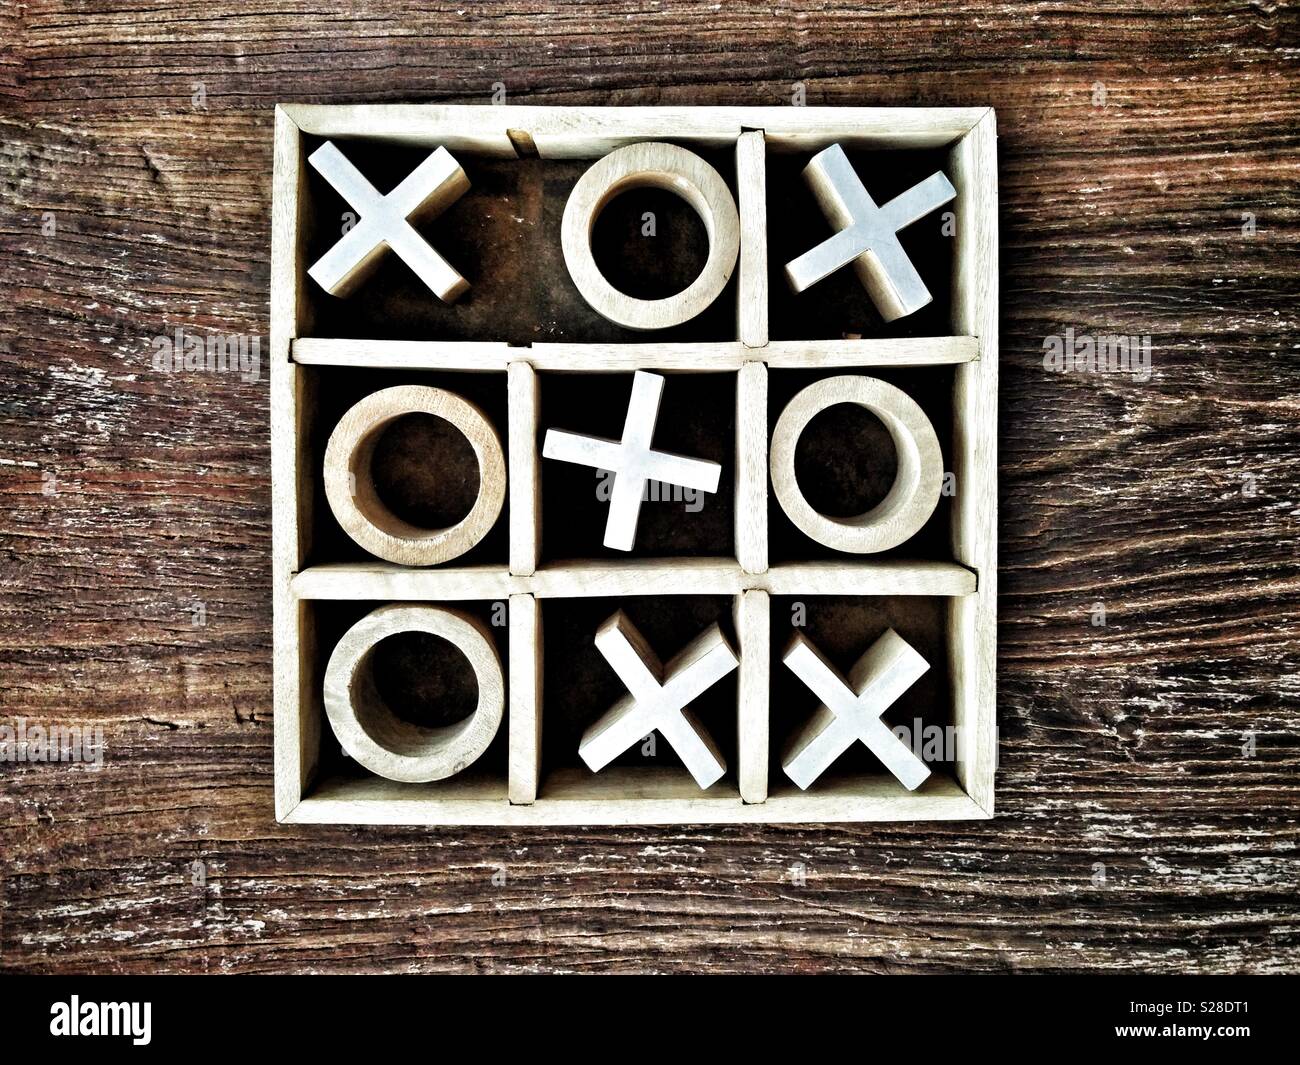 Wooden Noughts and Crosses or Tic-Tac-Toe game on wooden tabletop; crosses win. Stock Photo